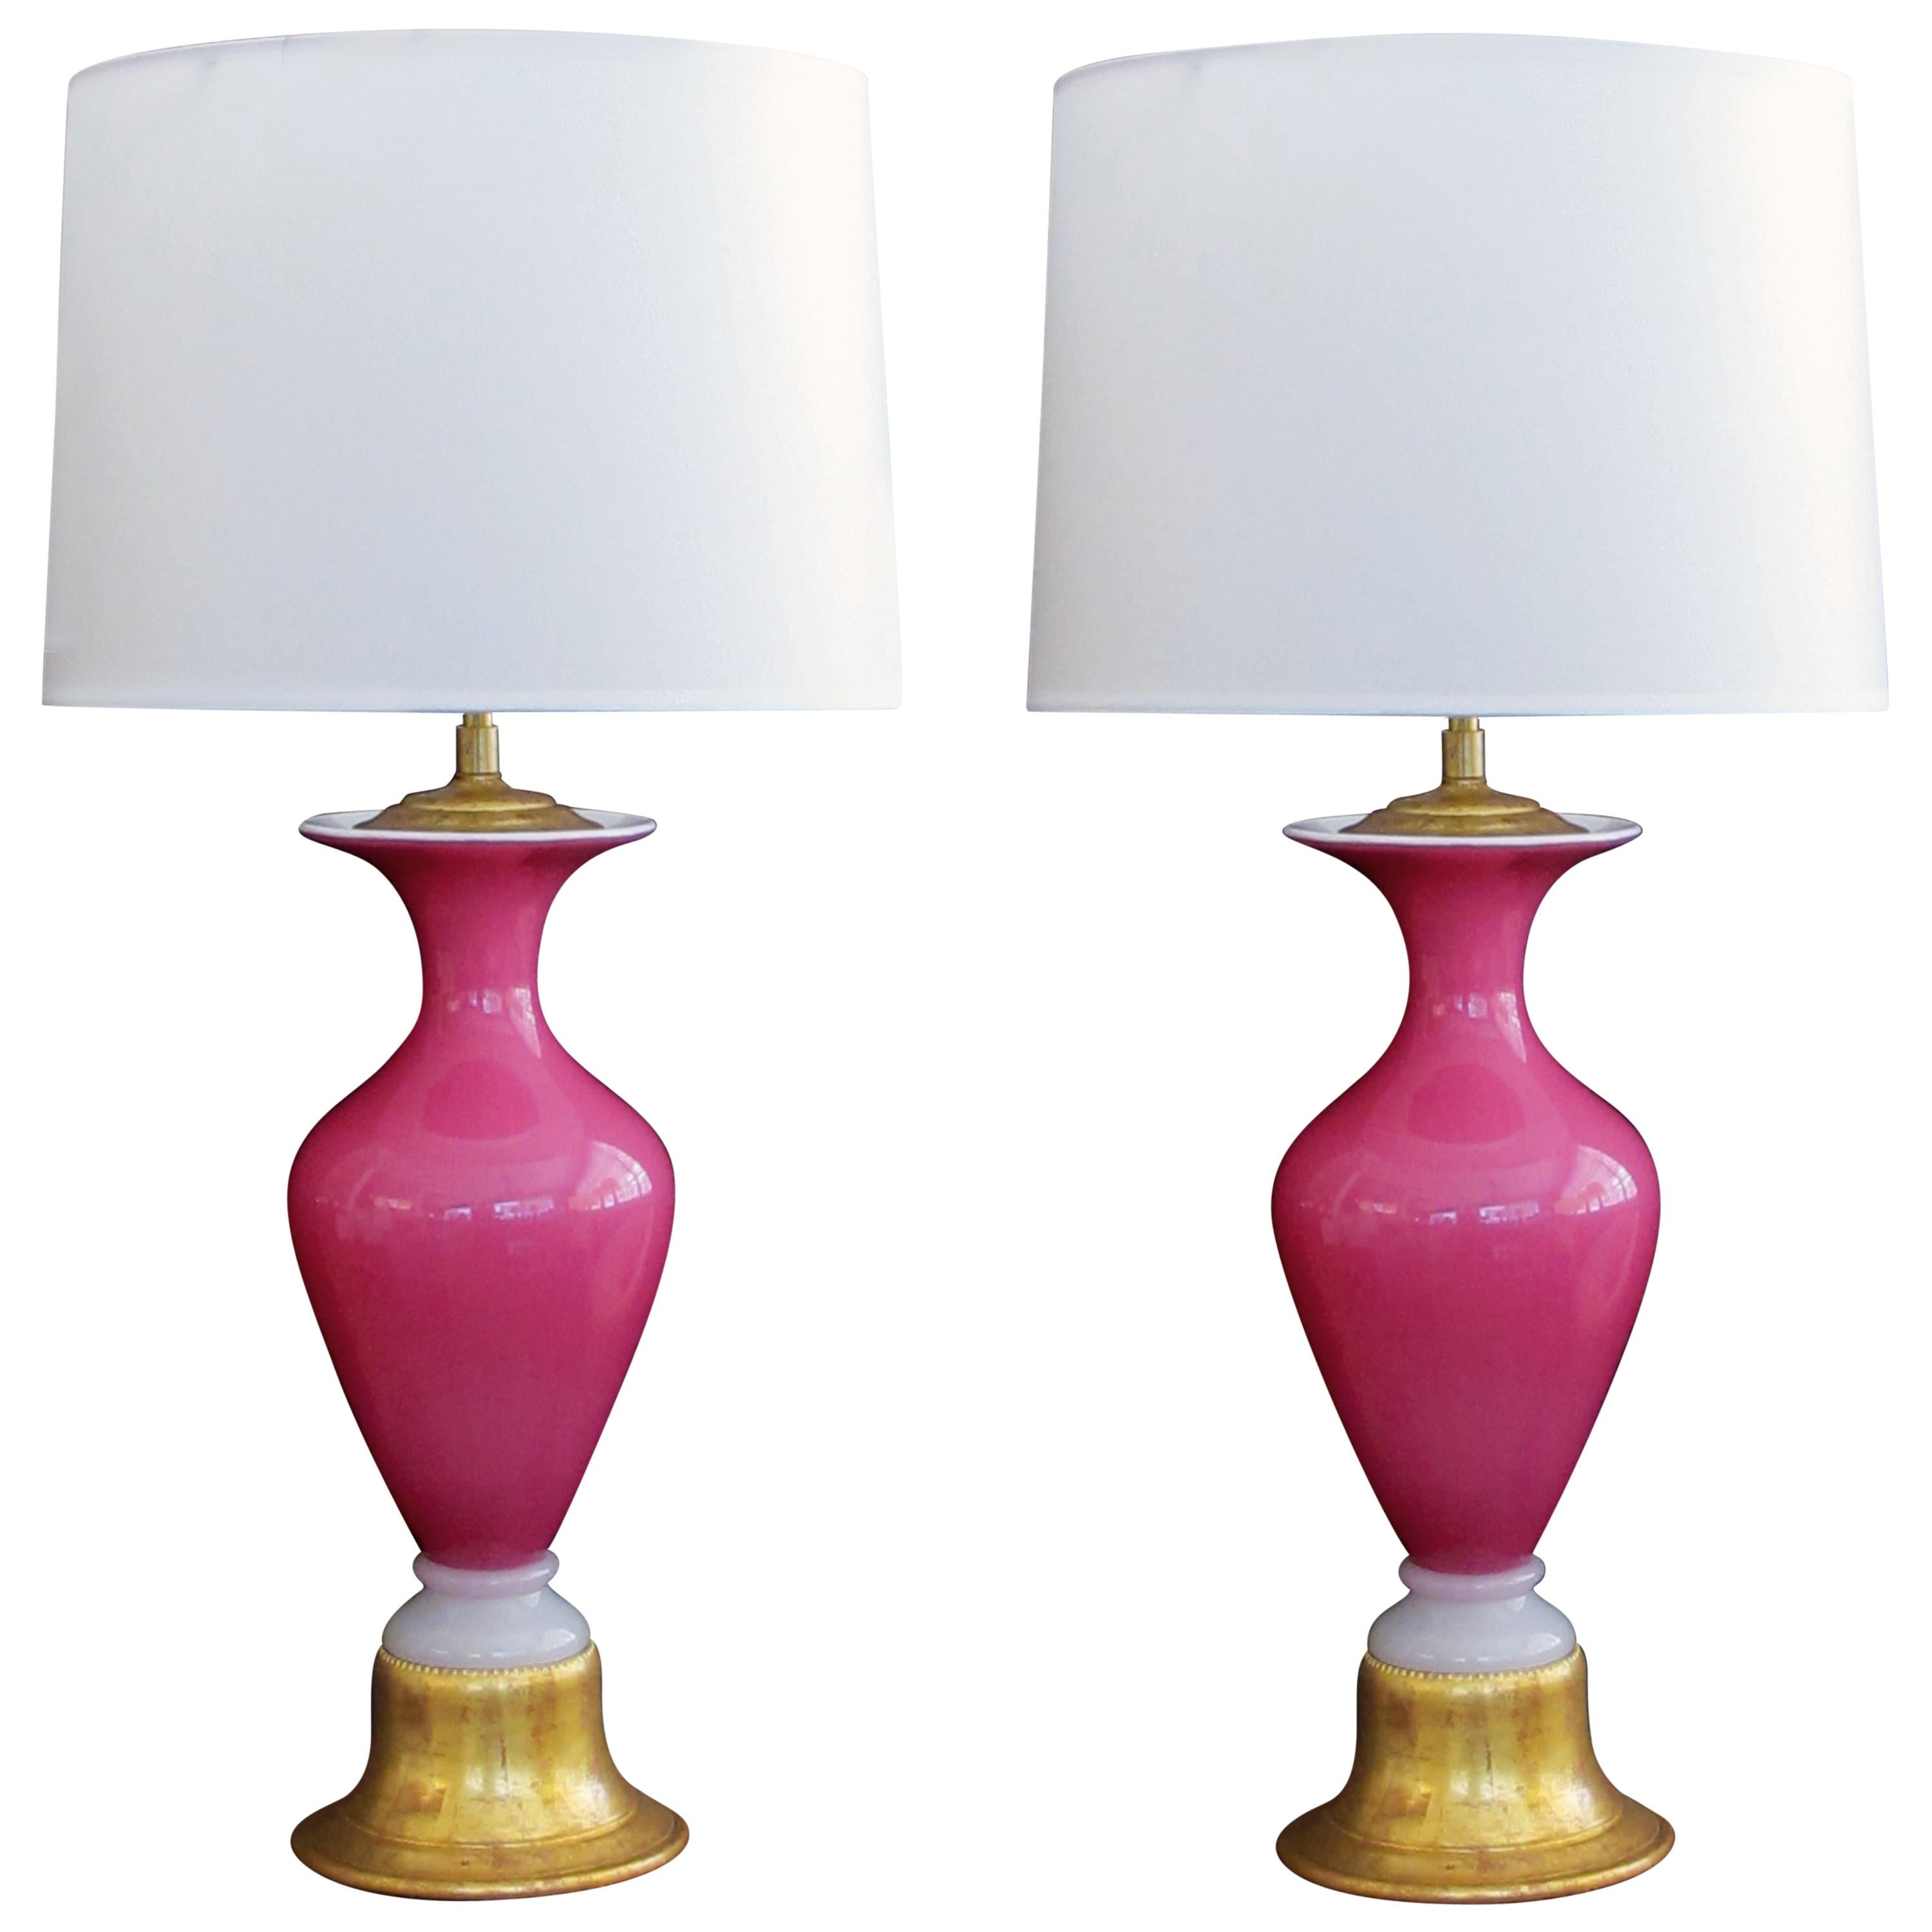 Striking Pair of Murano Midcentury Pink Cased-Glass Baluster-Form Lamps